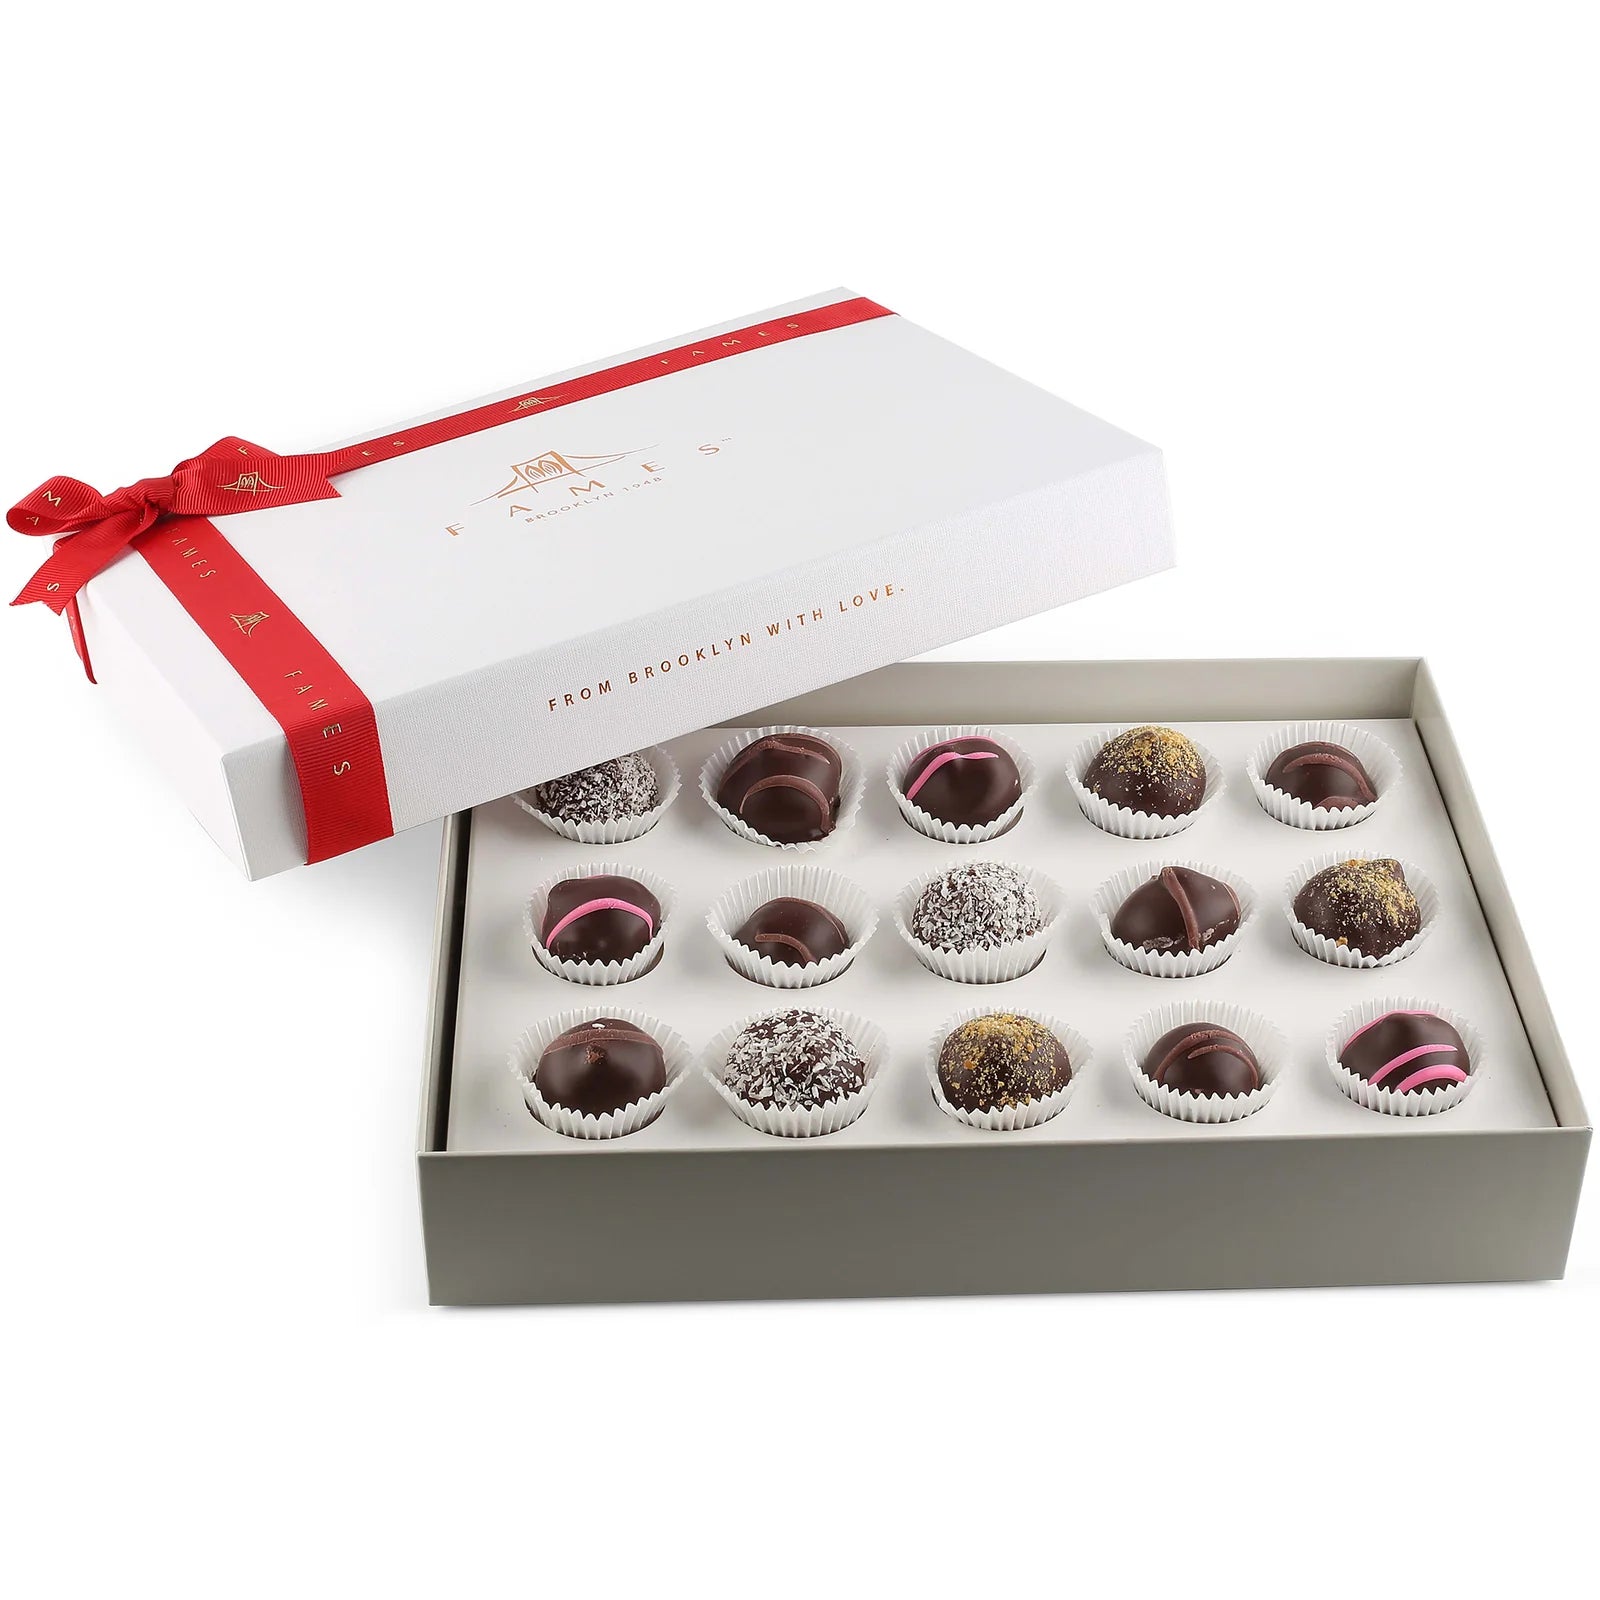 Fames Assorted Chocolate Gift Box  Fames Chocolate   